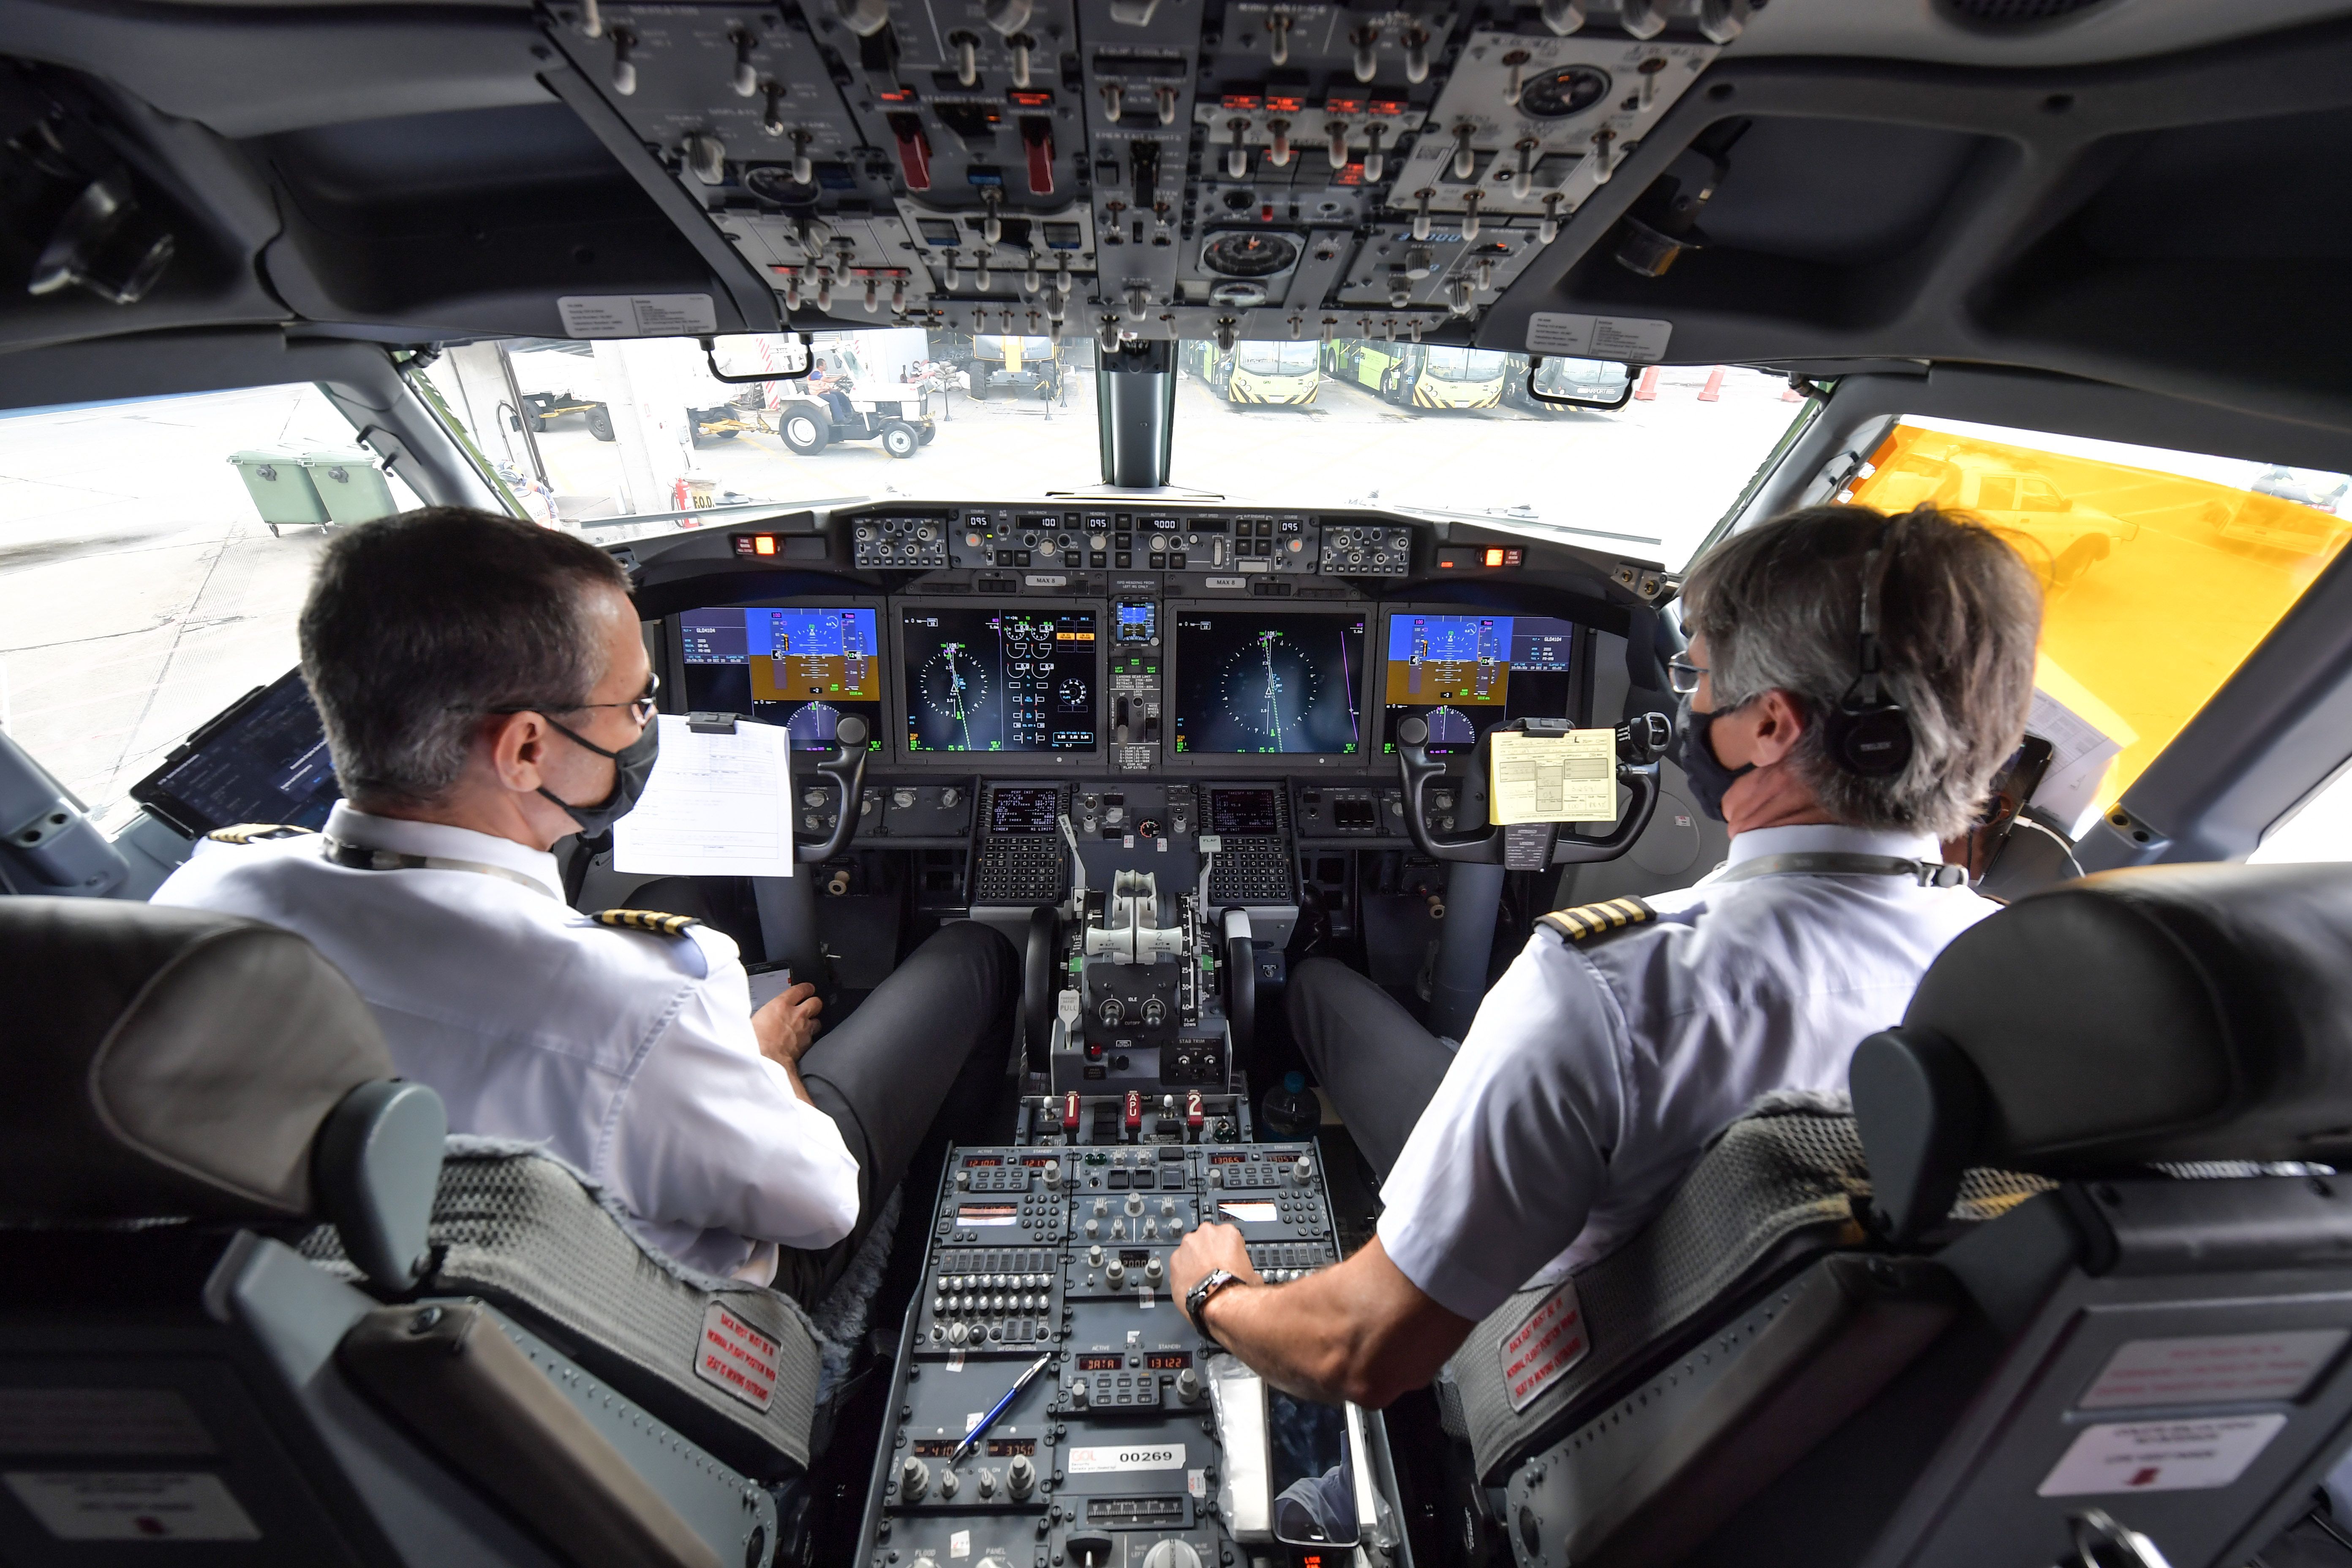 737 cockpit with two pilots